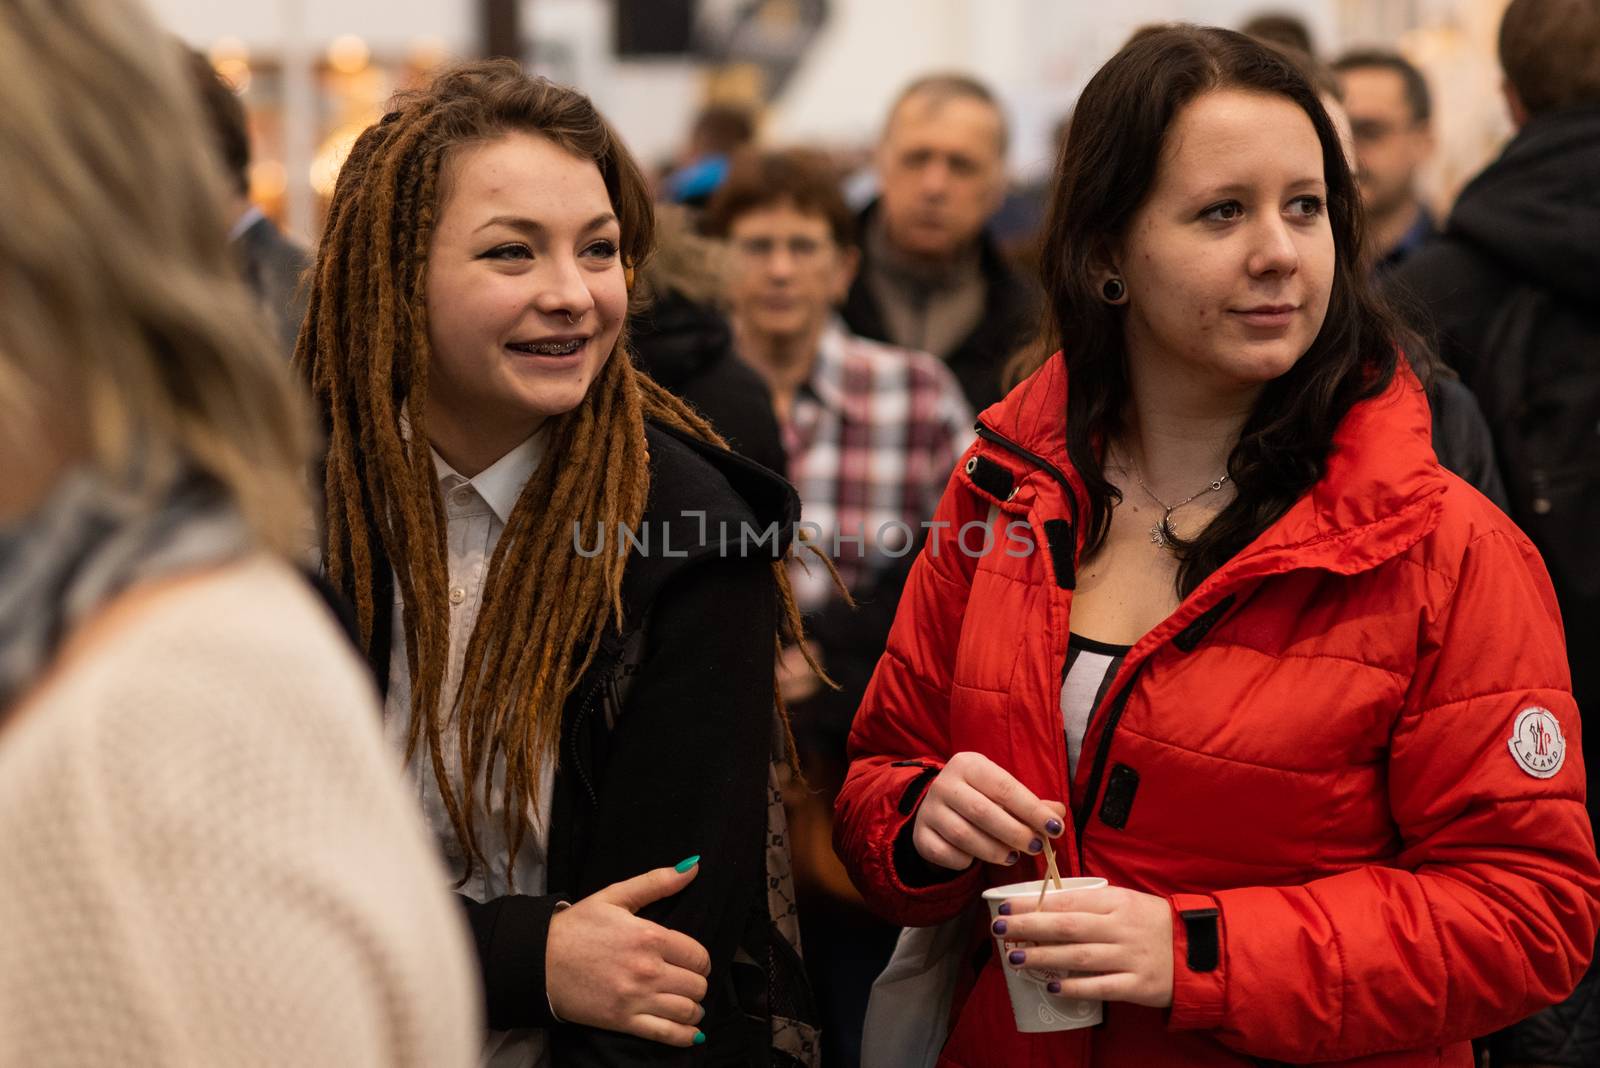 Two women walking in the crowd attending an event at the convention trade center in Brno. BVV Brno Exhibition center. Czech Republic by gonzalobell